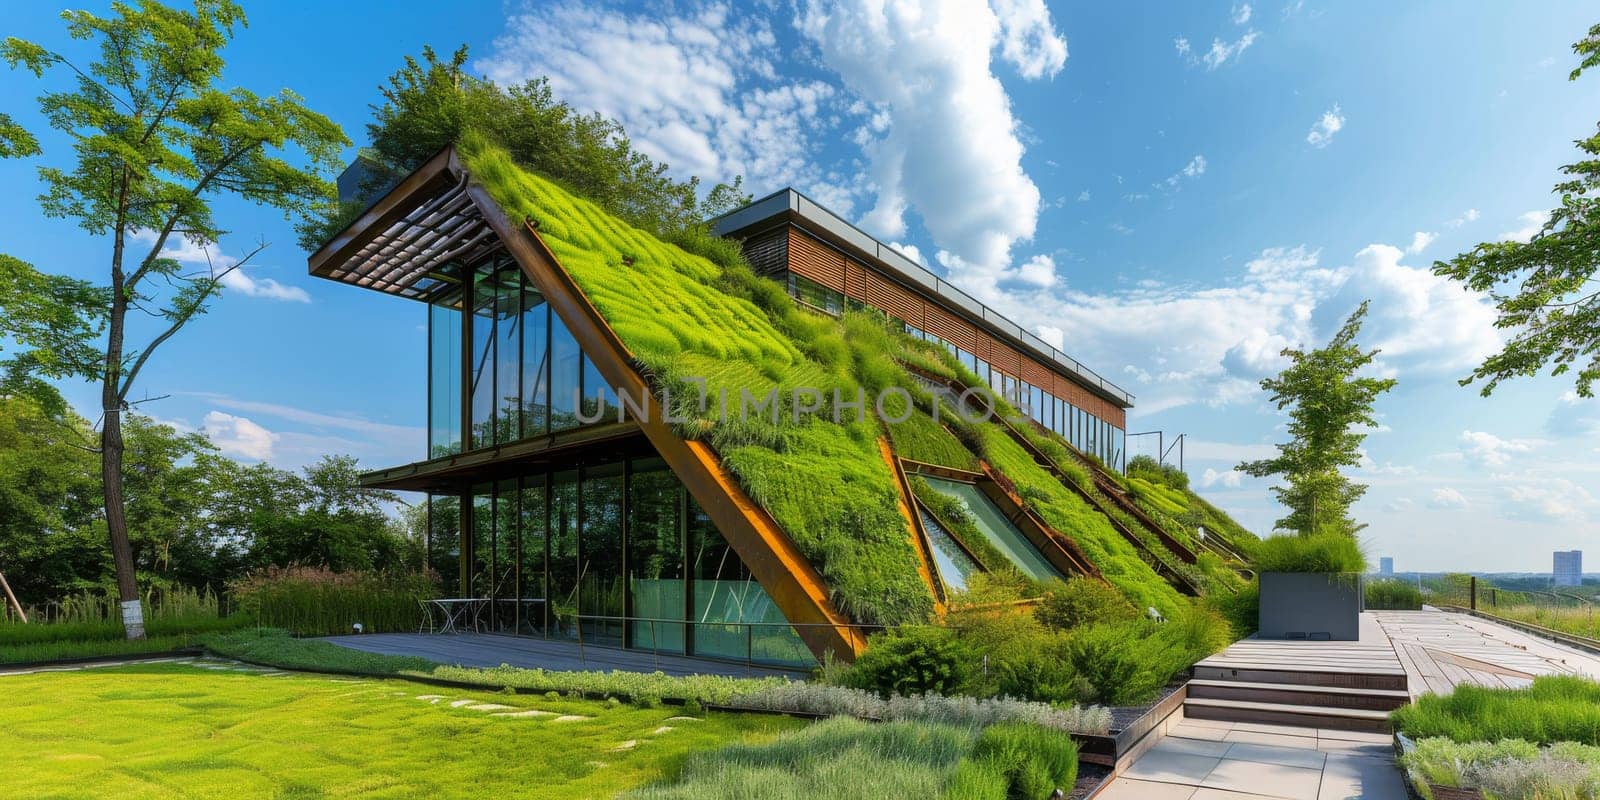 Green building designs with images of energy-efficient buildings, green roofs by Kadula